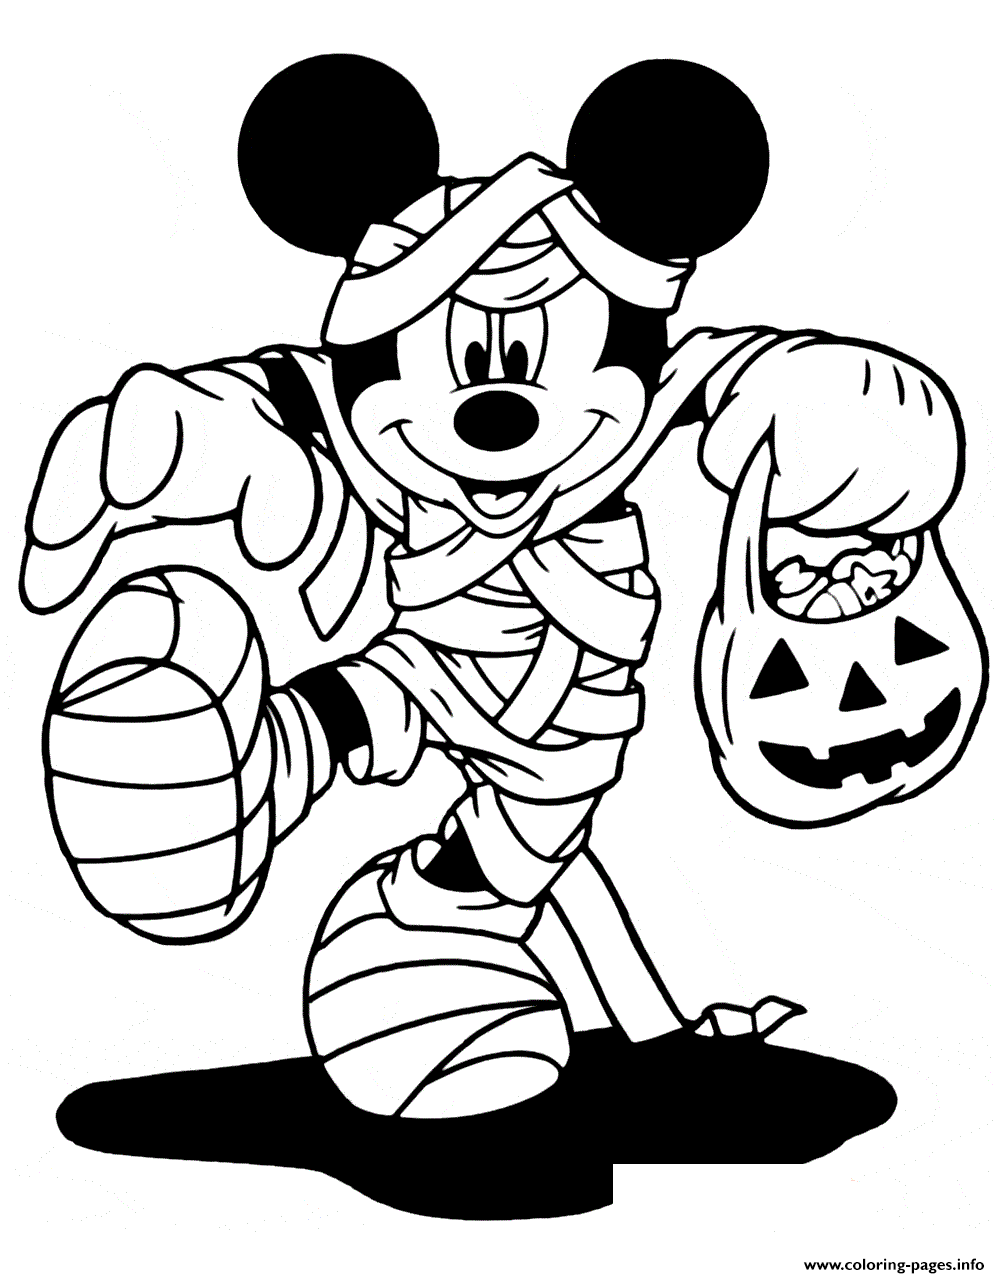 mickey-mouse-as-a-mummy-disney-halloween-coloring-pages-printable